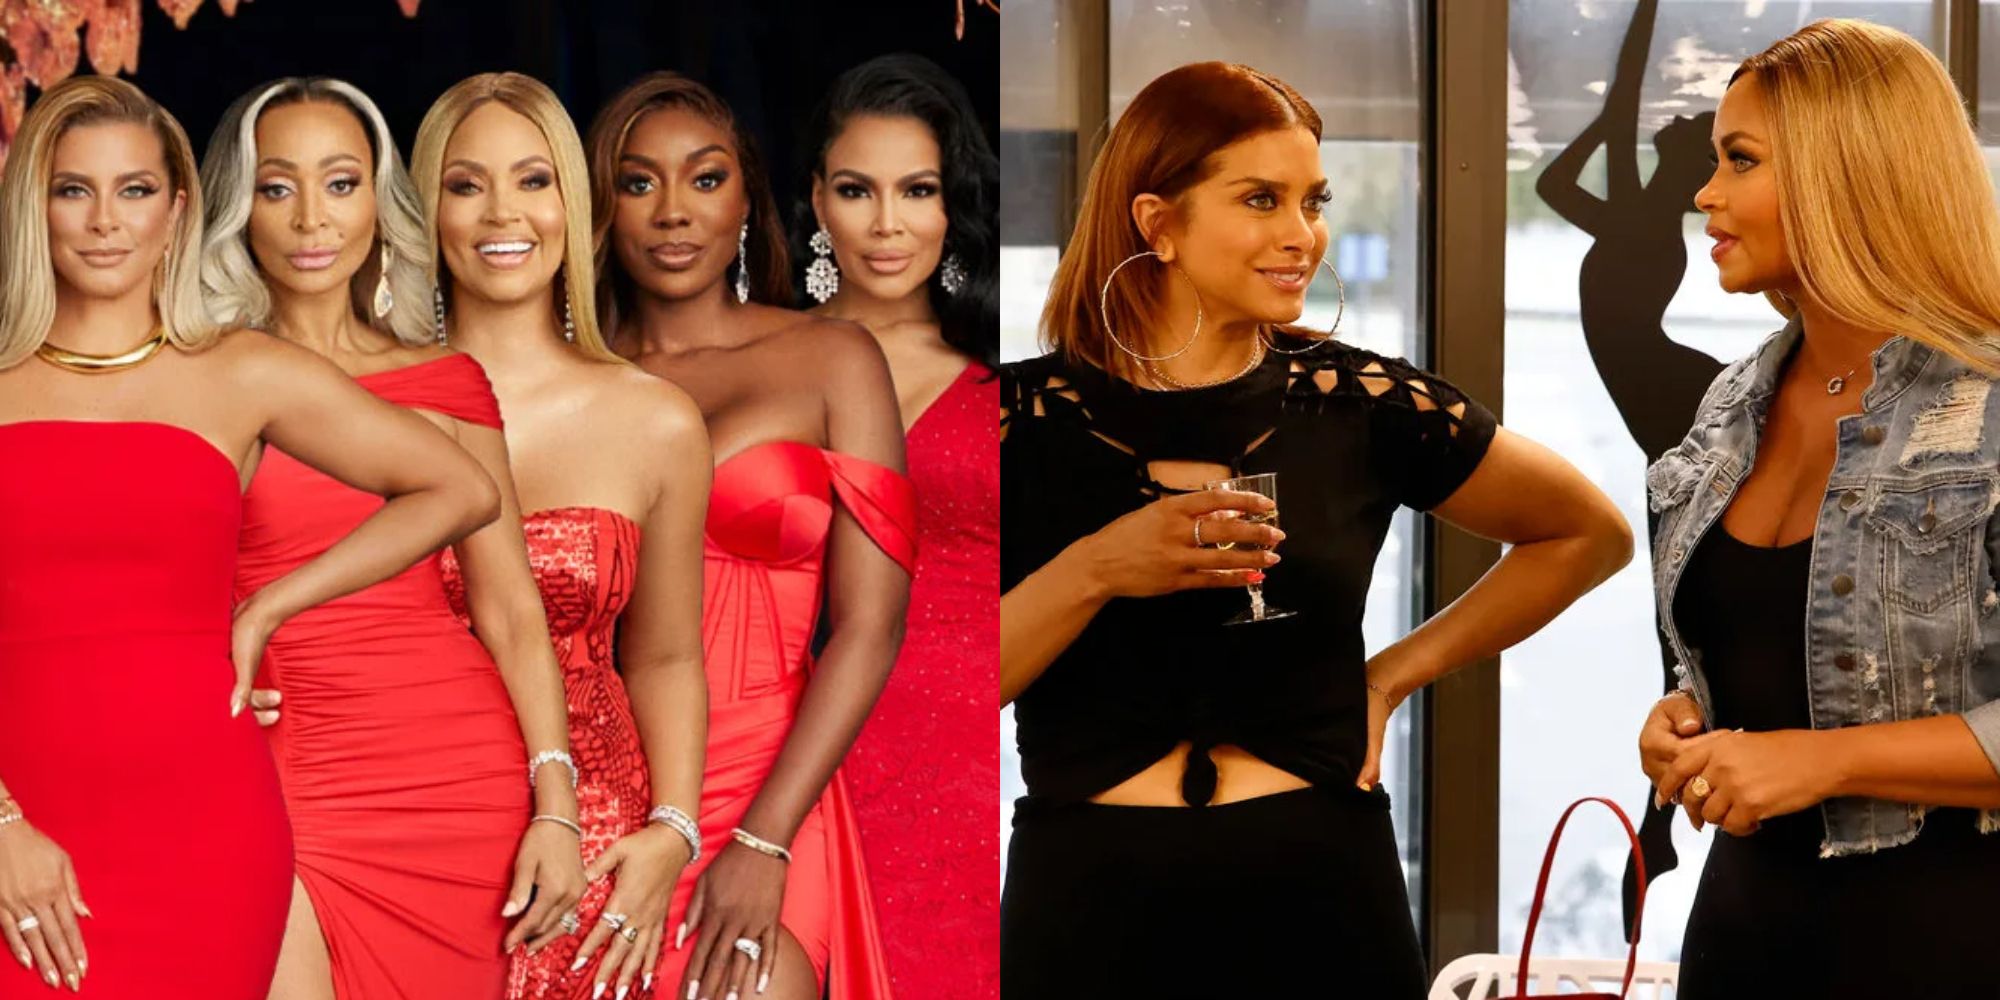 Promo image featuring the cast of RHOP season 7 and two cast members talking